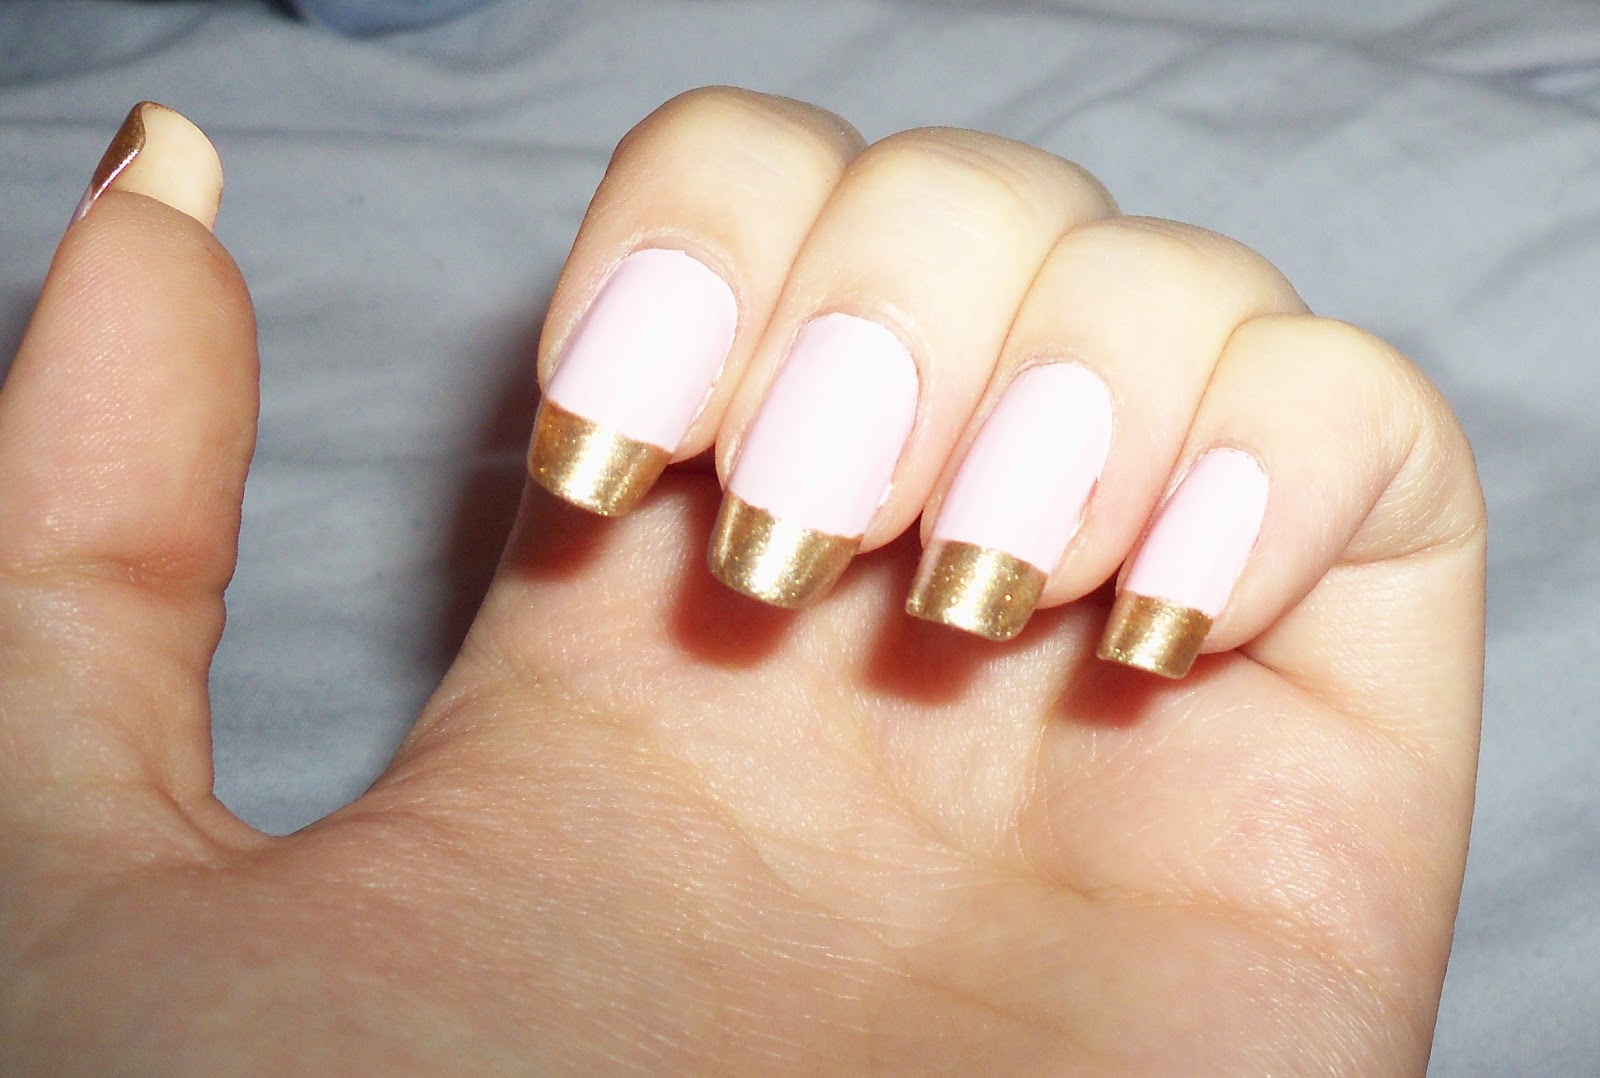 5. Girly and Easy Nail Designs for Short Nails - wide 4